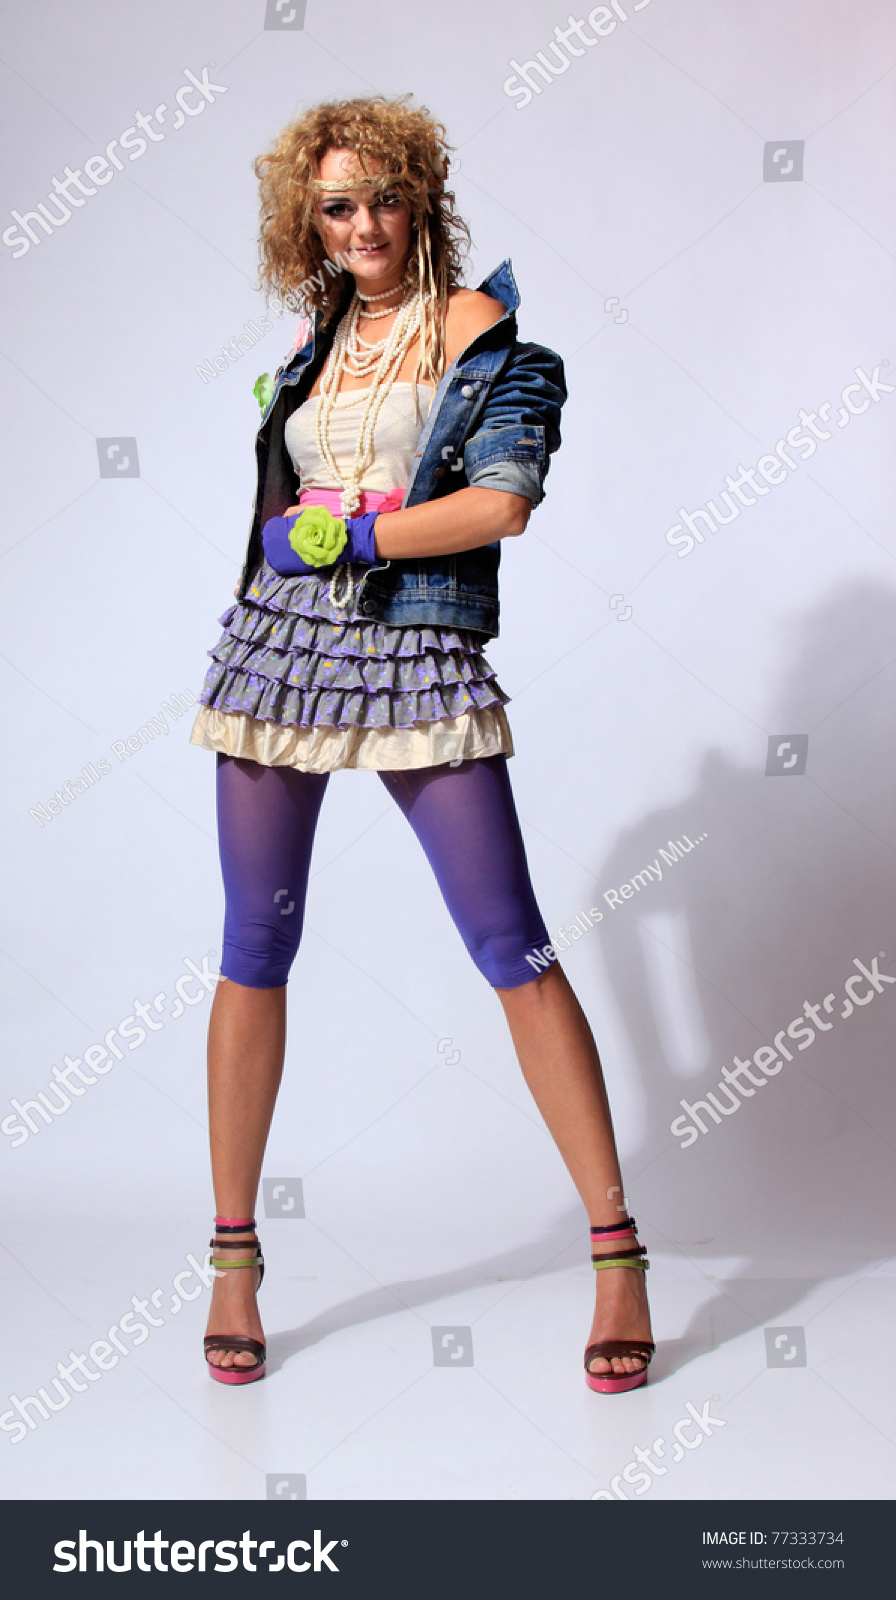 80'S Fashion Woman Over Gray Background Stock Photo 77333734 : Shutterstock